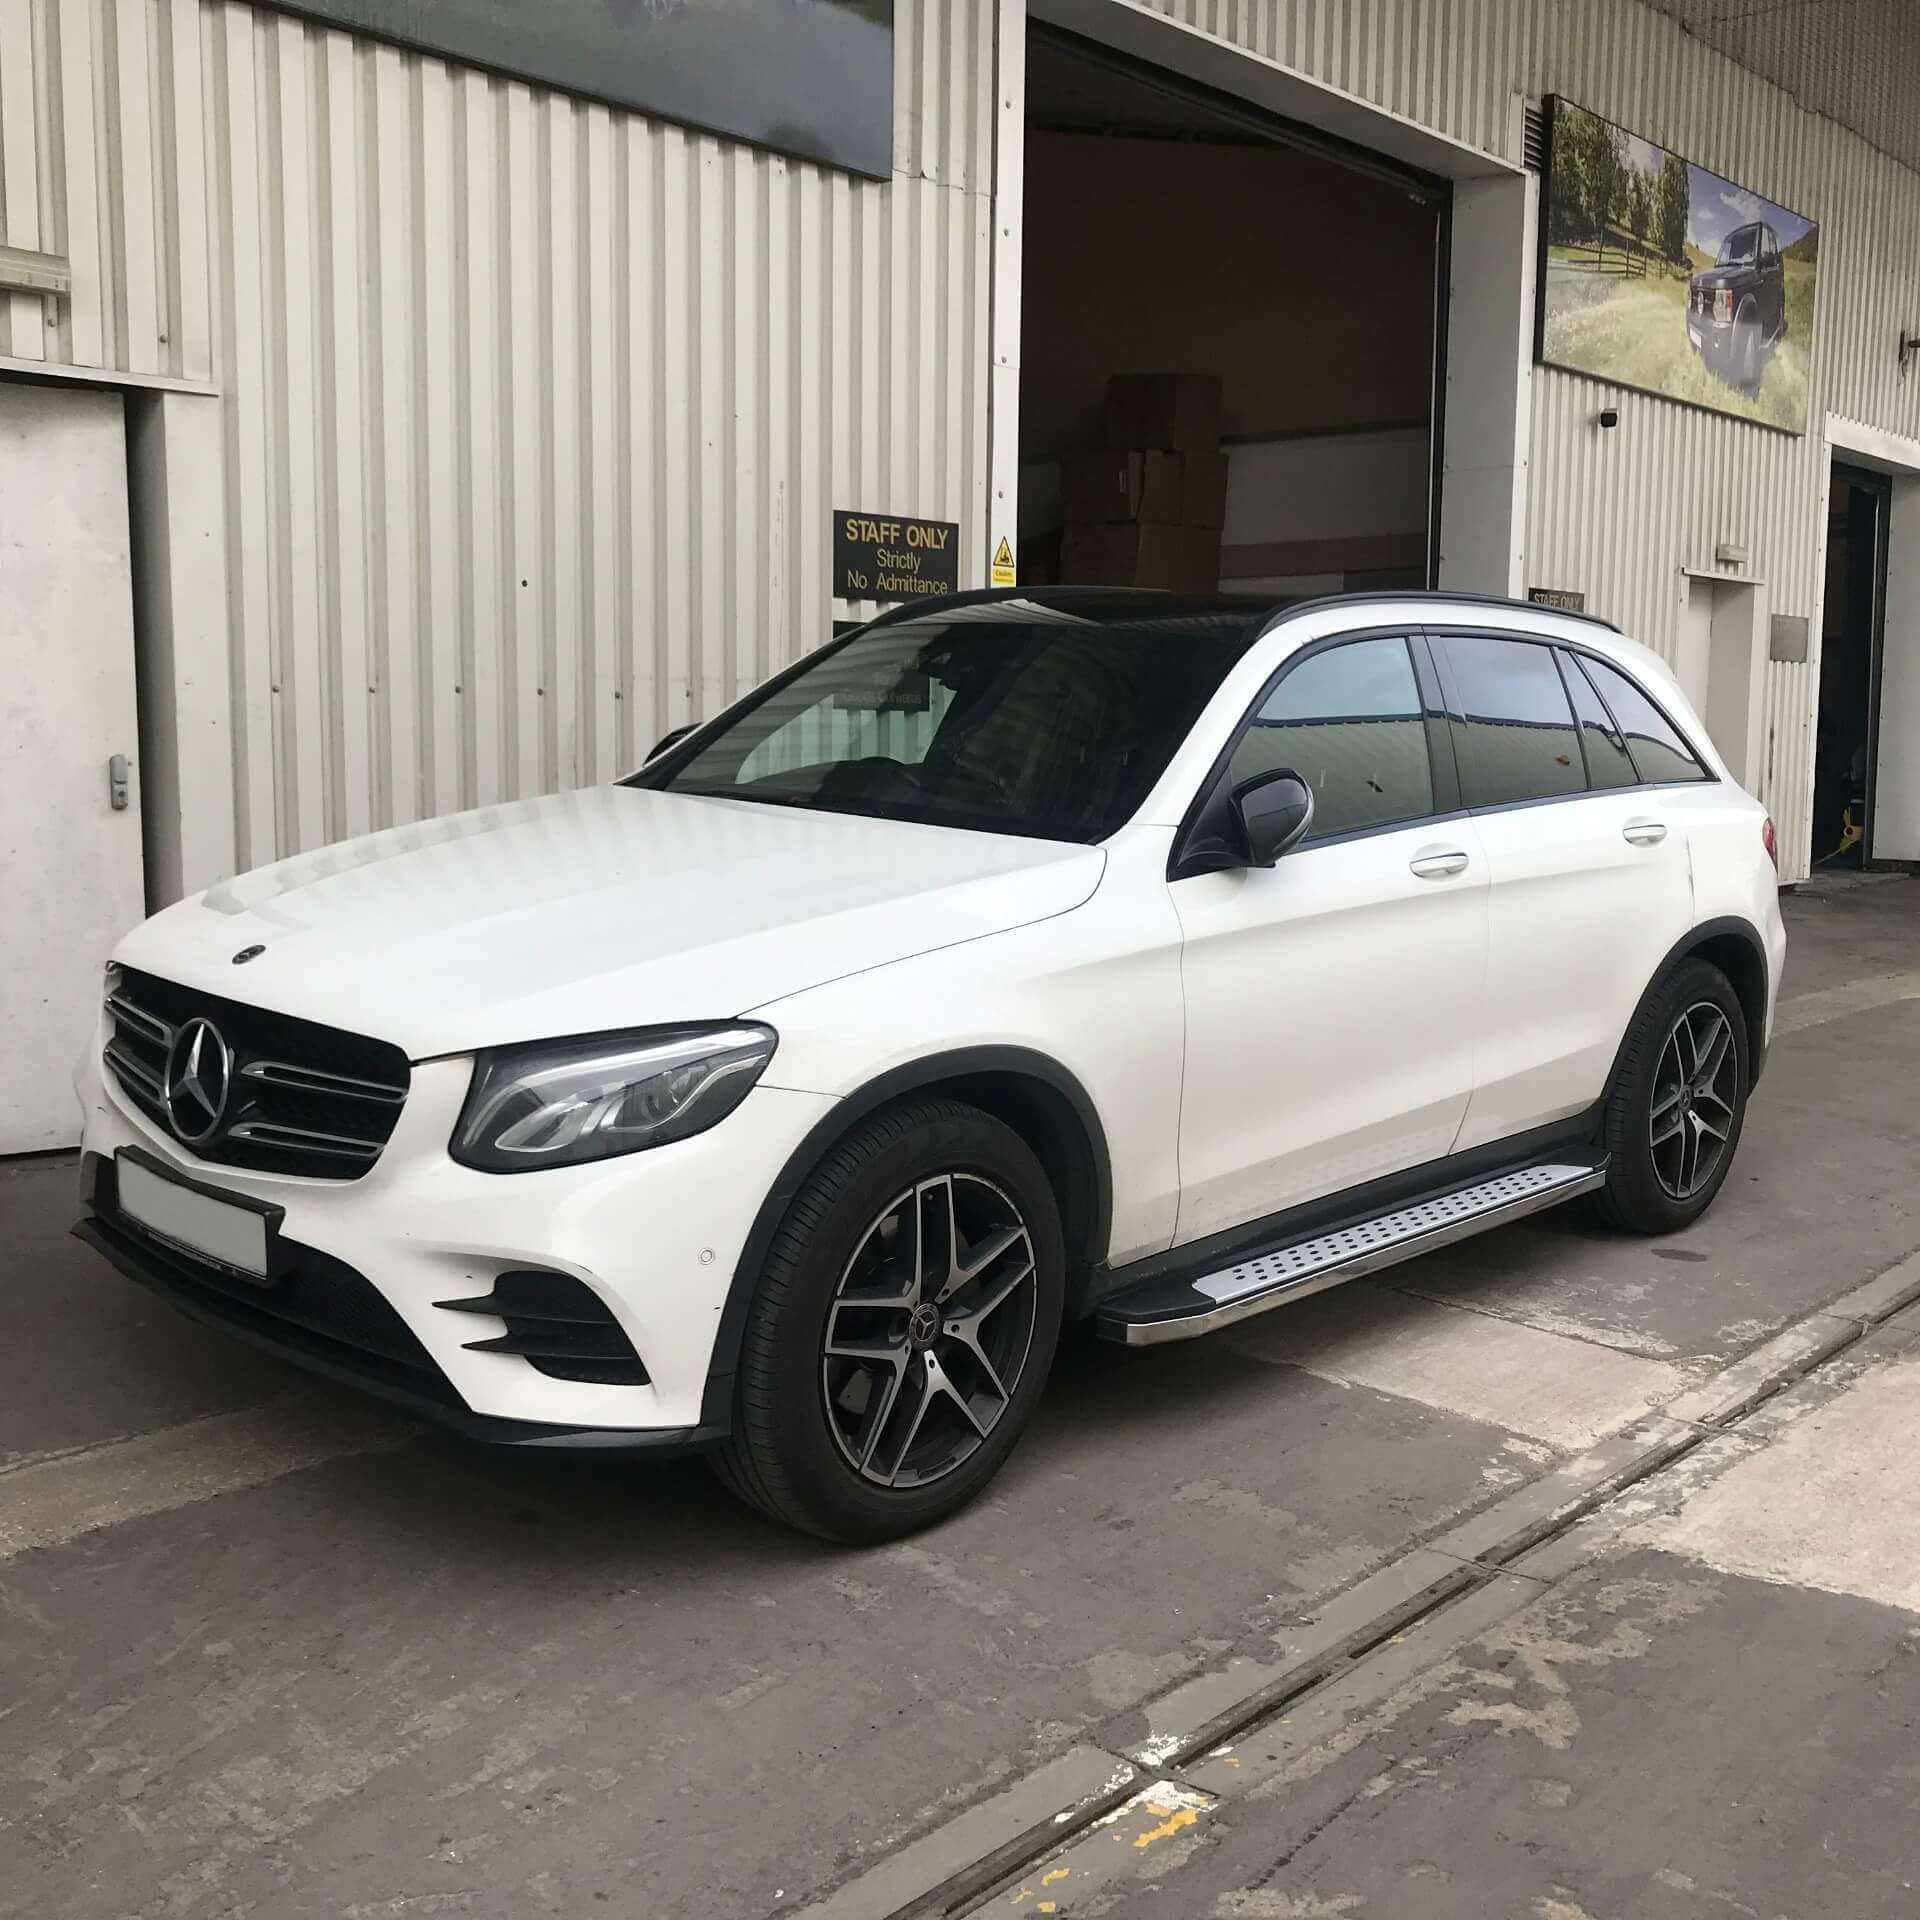 Direct4x4 accessories for Mercedes GLC vehicles with a photo of a white Mercedes GLC parked outside our depot fitted with Freedom style side steps